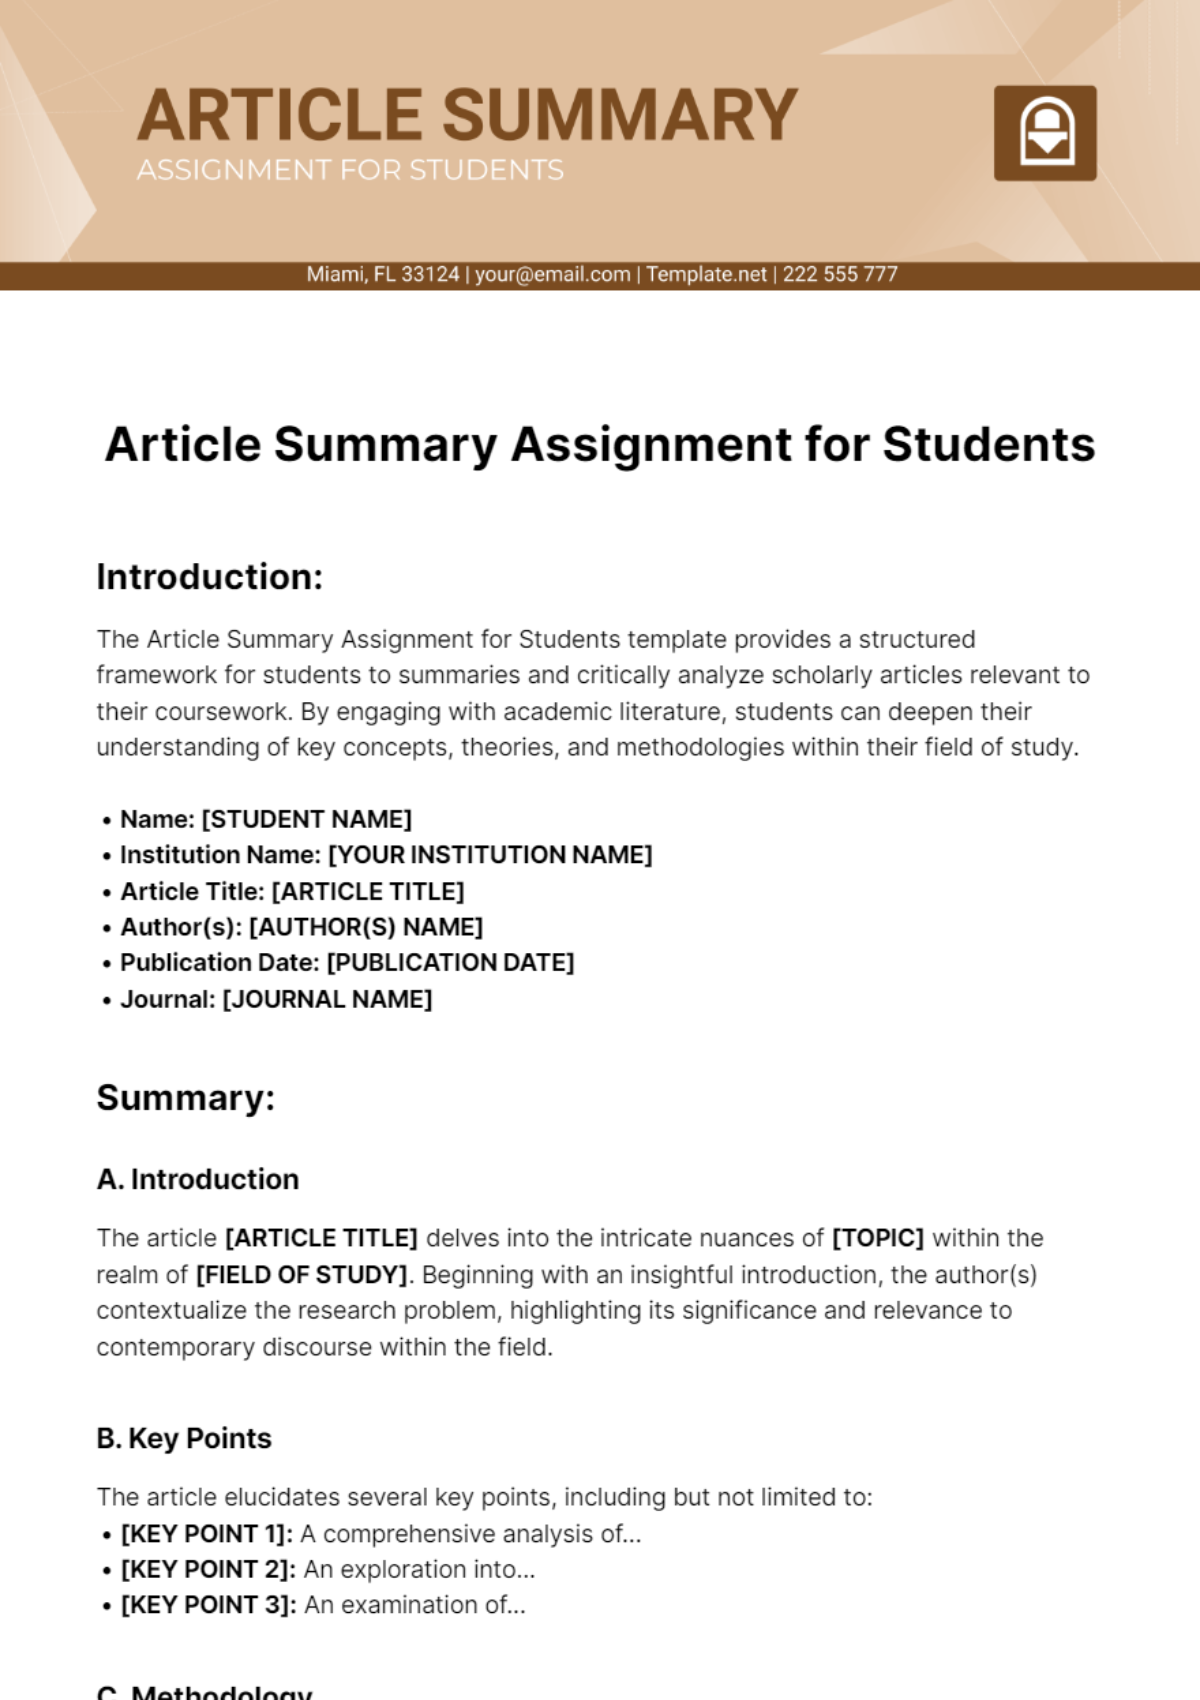 Article Summary Assignment for Students Template